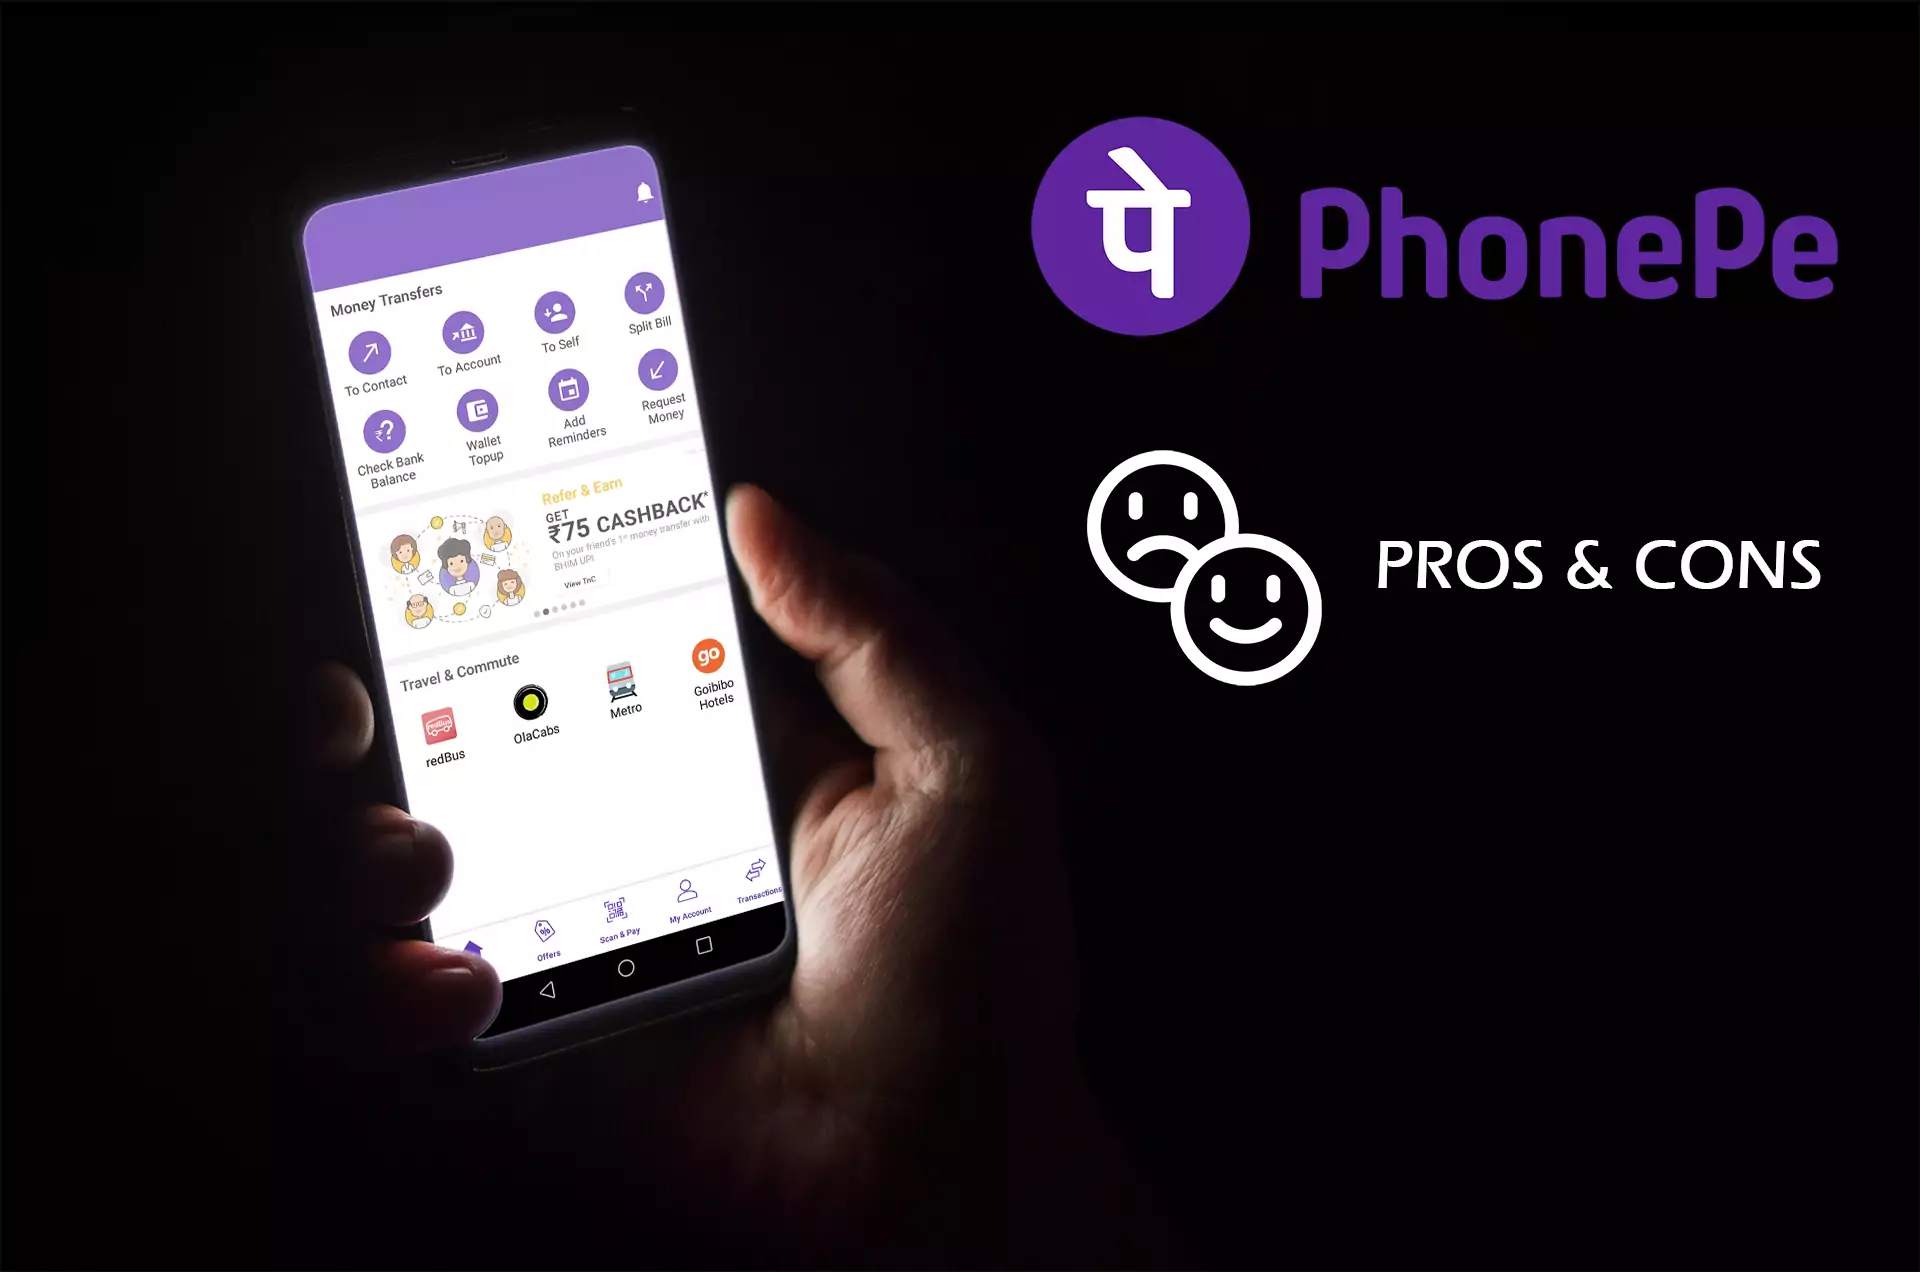 There are more pros of using PhonePe than cons.